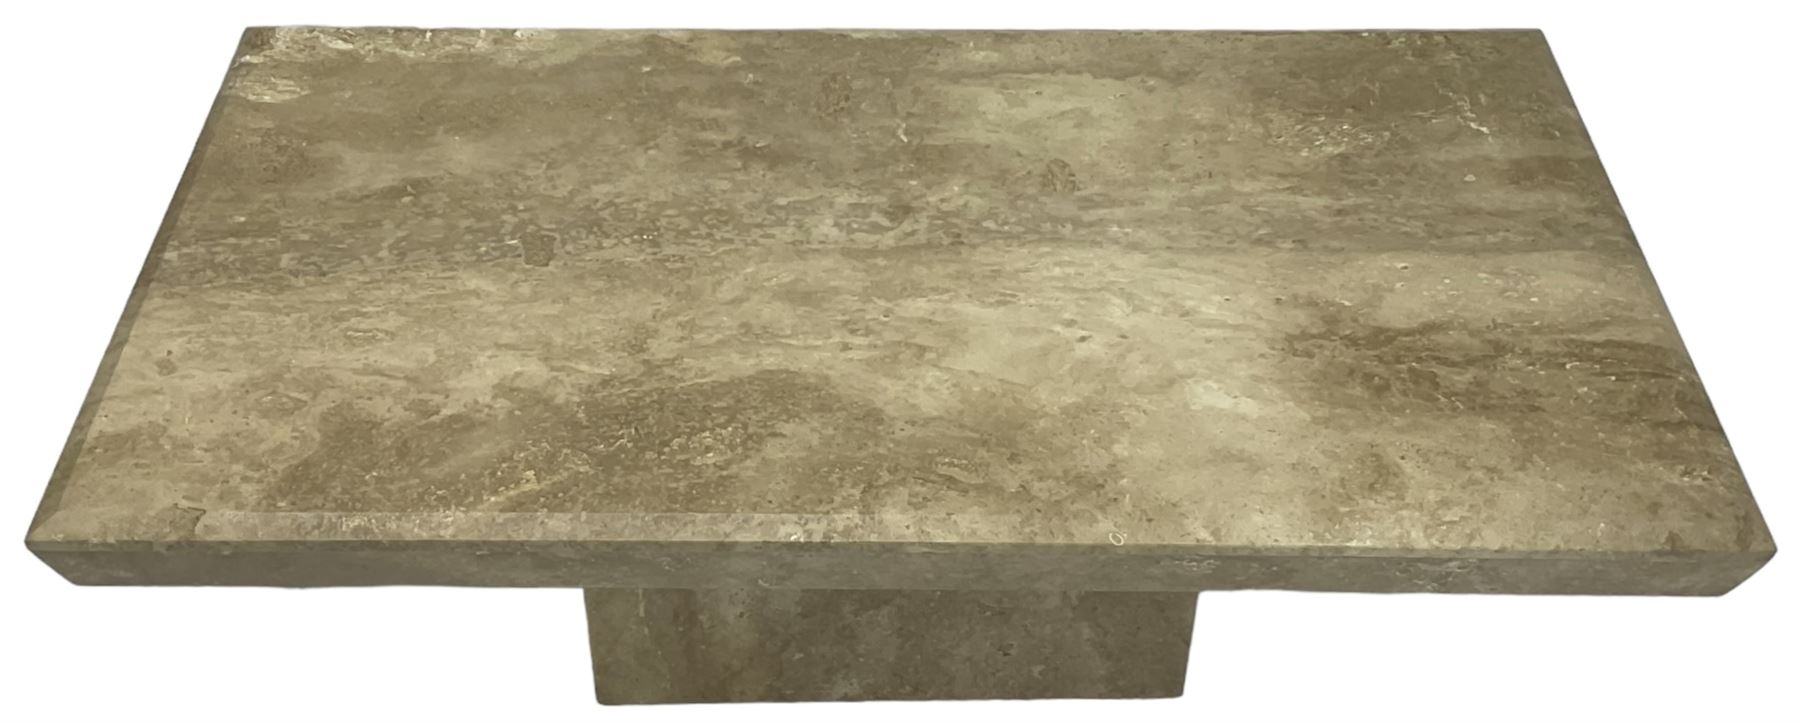 Travertine coffee table - Image 2 of 5